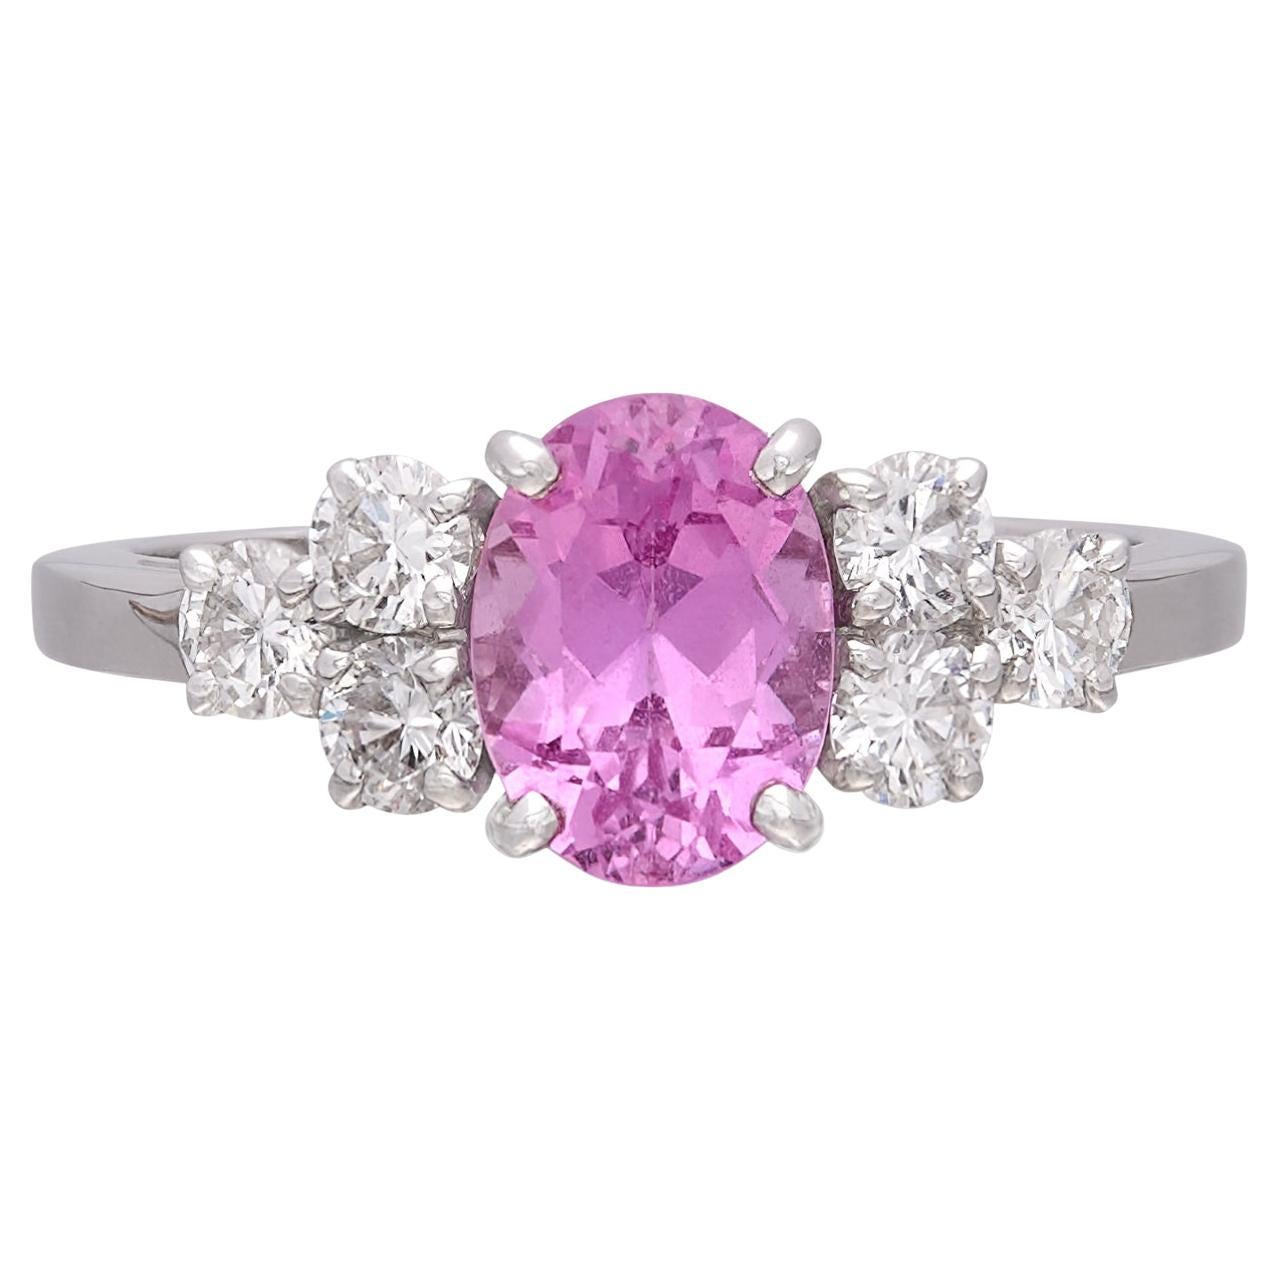 Alexandre Reza No Heat 1.57-Ct Pink Sapphire Ring, French For Sale